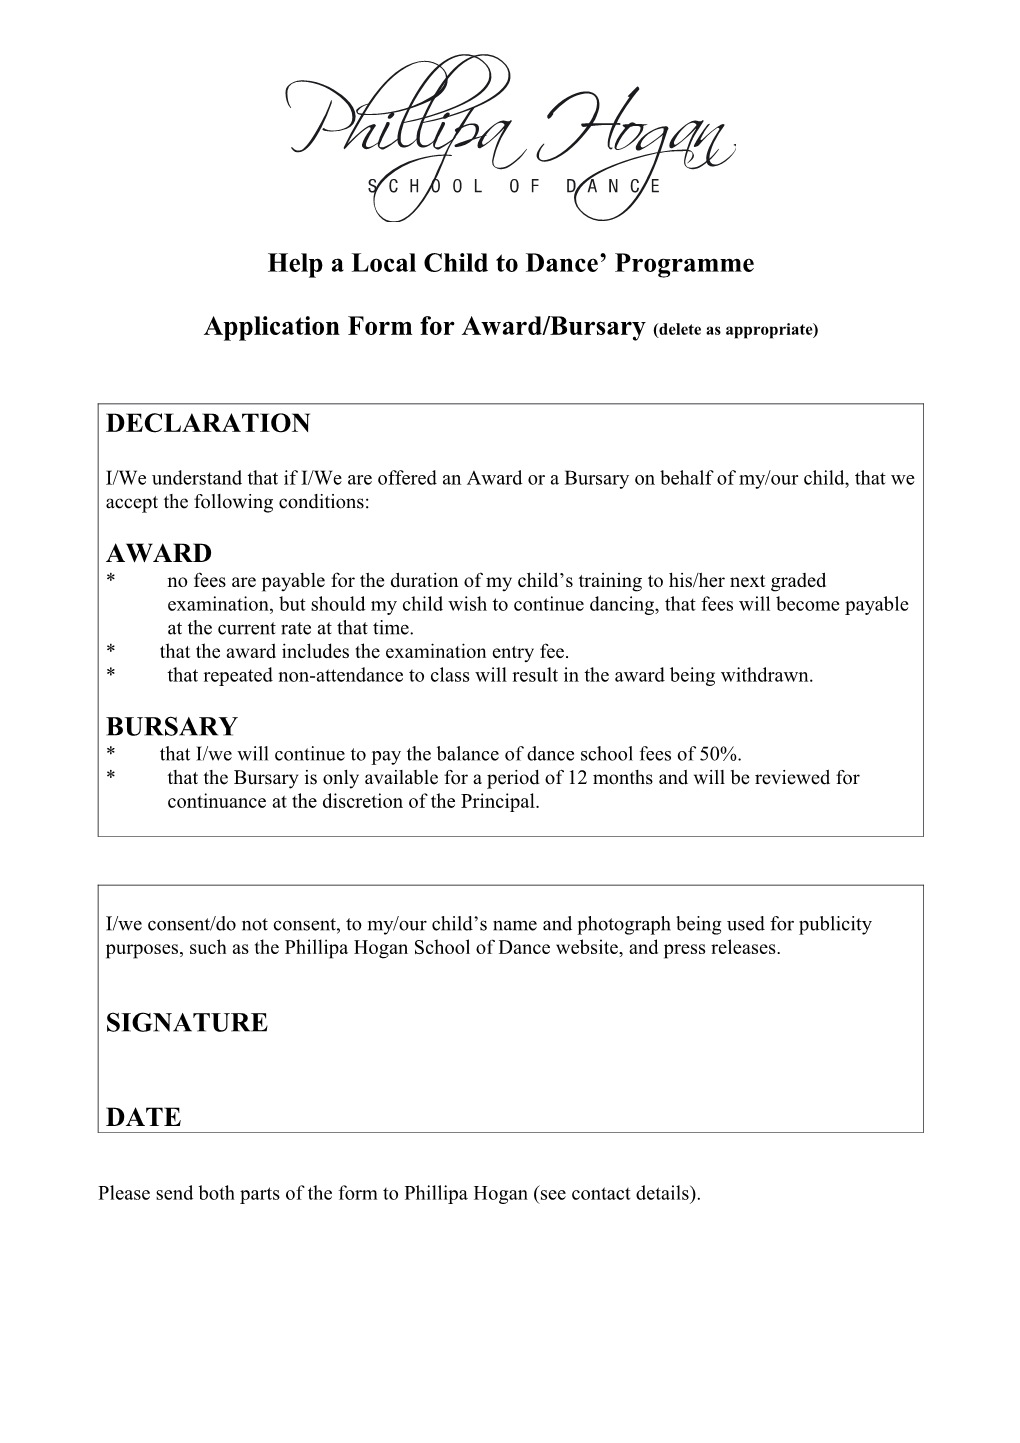 Help a Local Child to Dance Programme